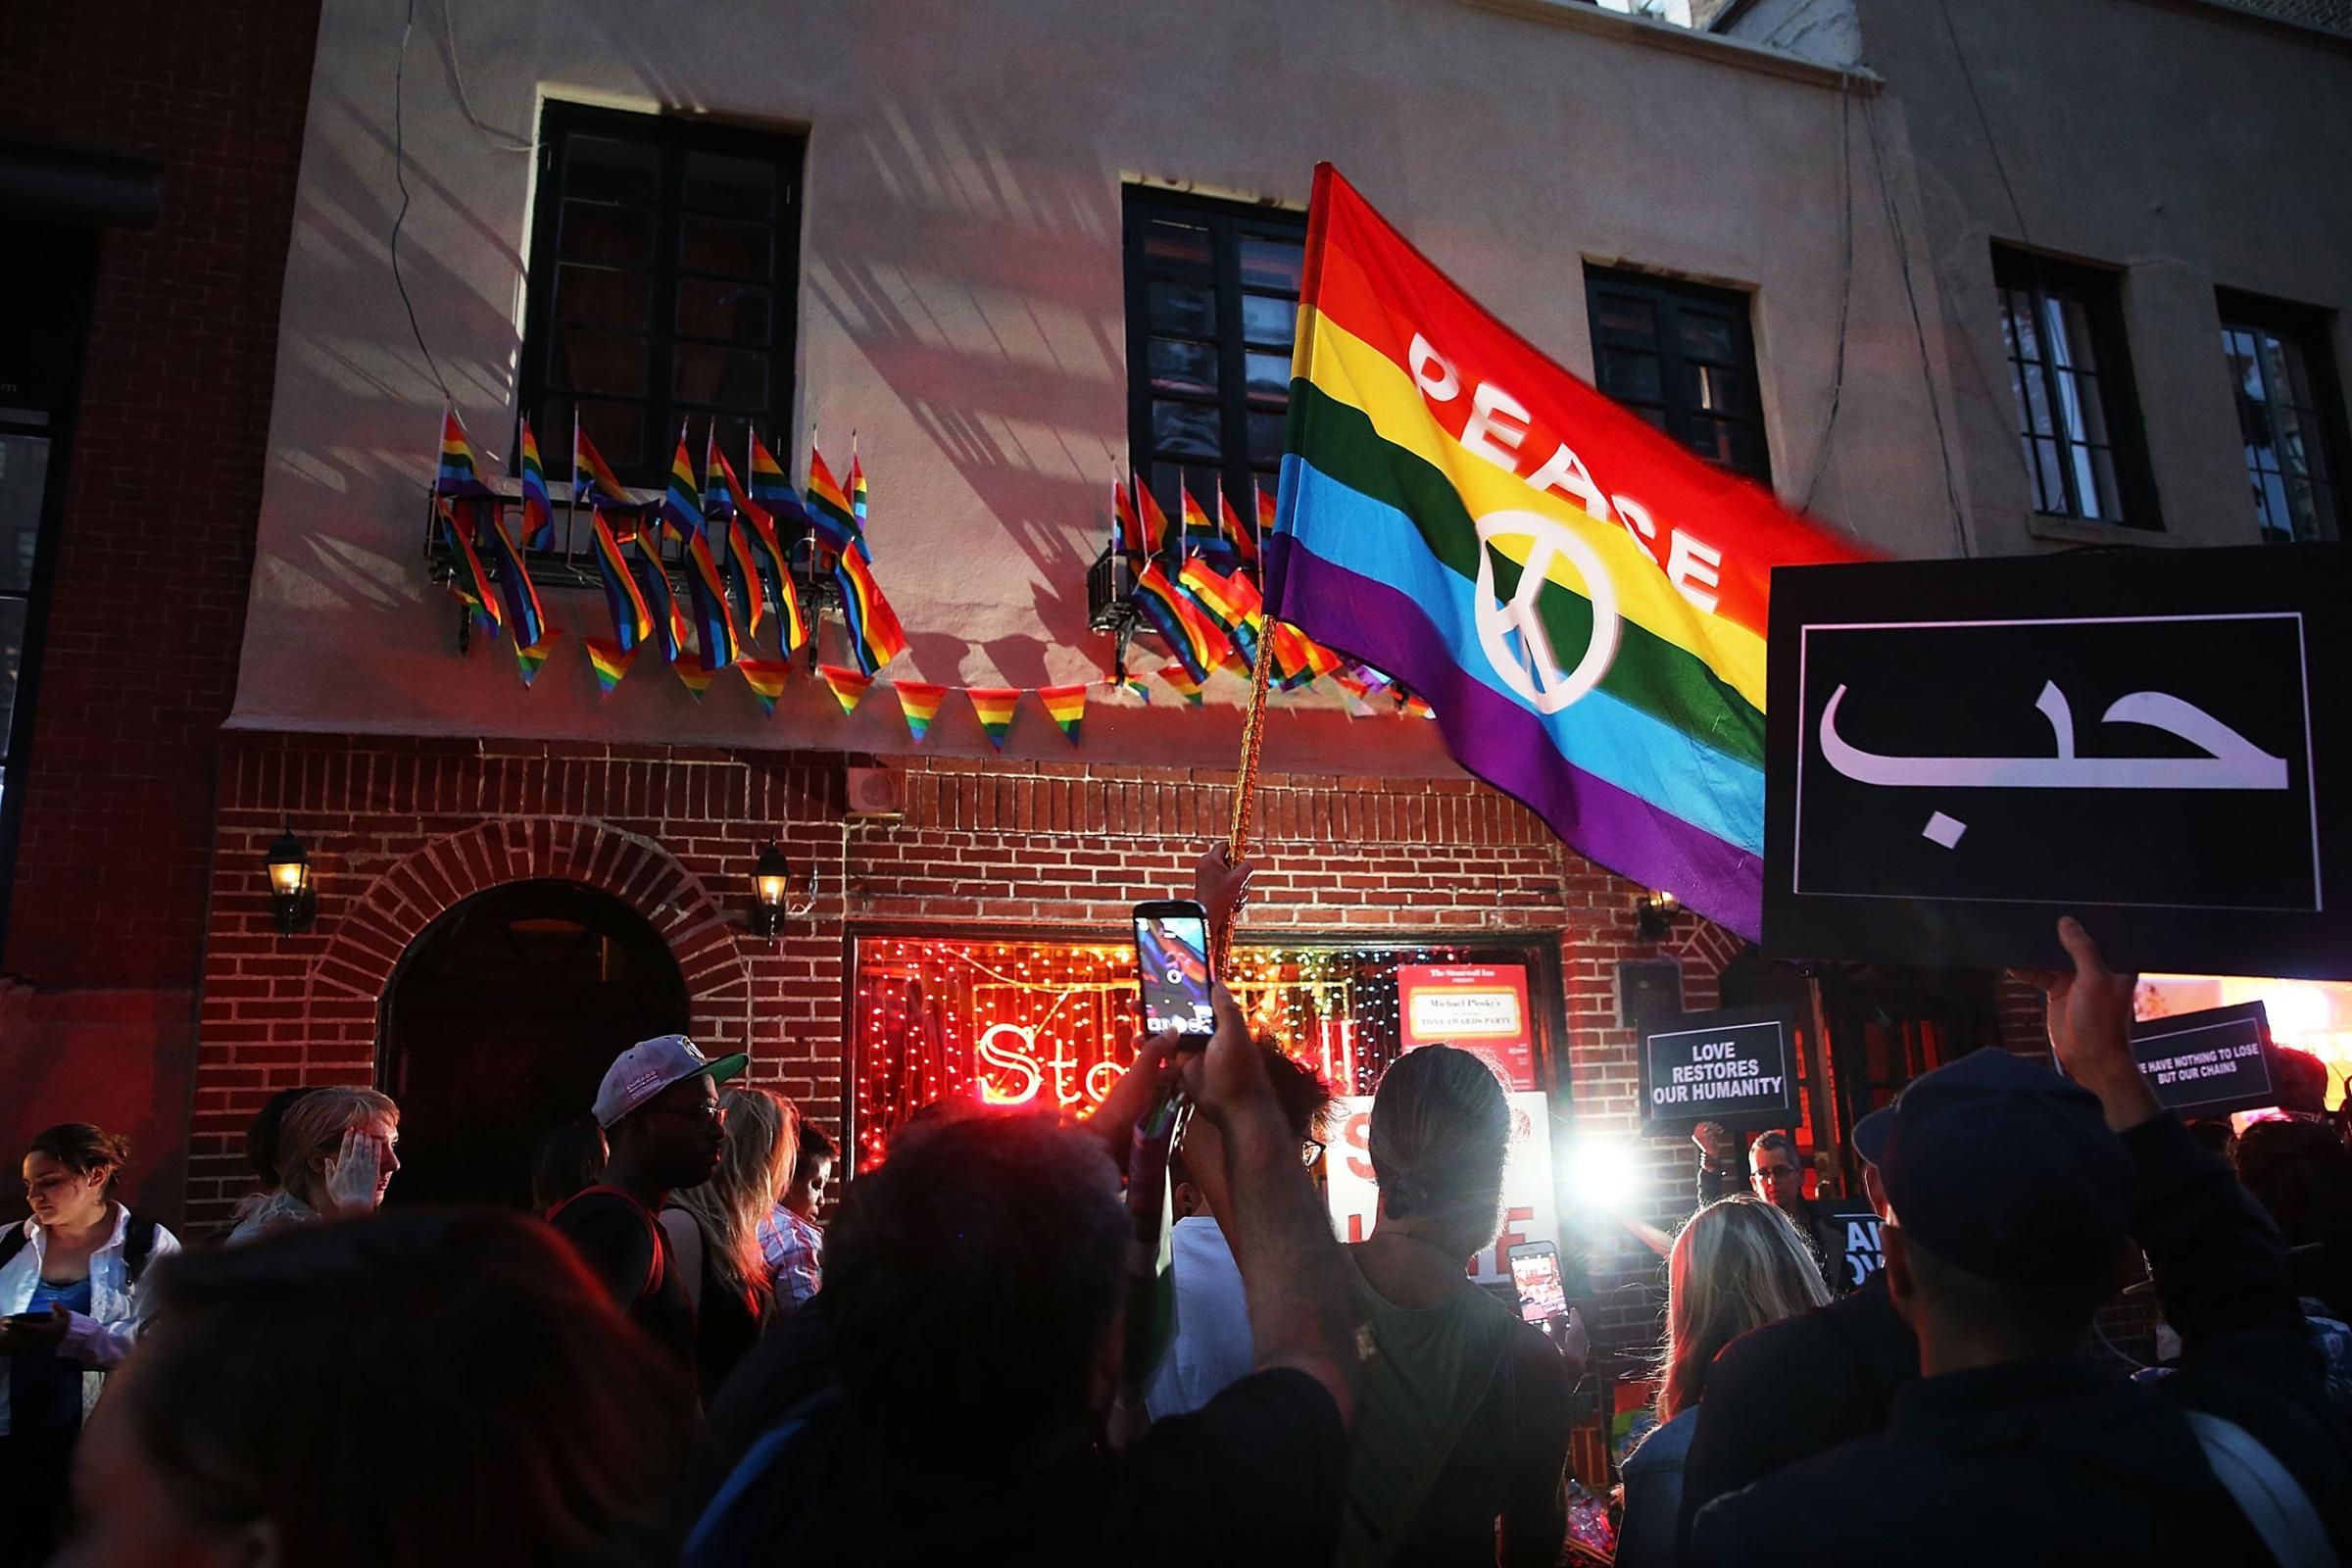 Mourners gather outside of the iconic New York City gay and lesbian bar the Stonewall Inn to light candles,lay flowers and grieve for those killed in Orlando last evening on June 12, 2016.